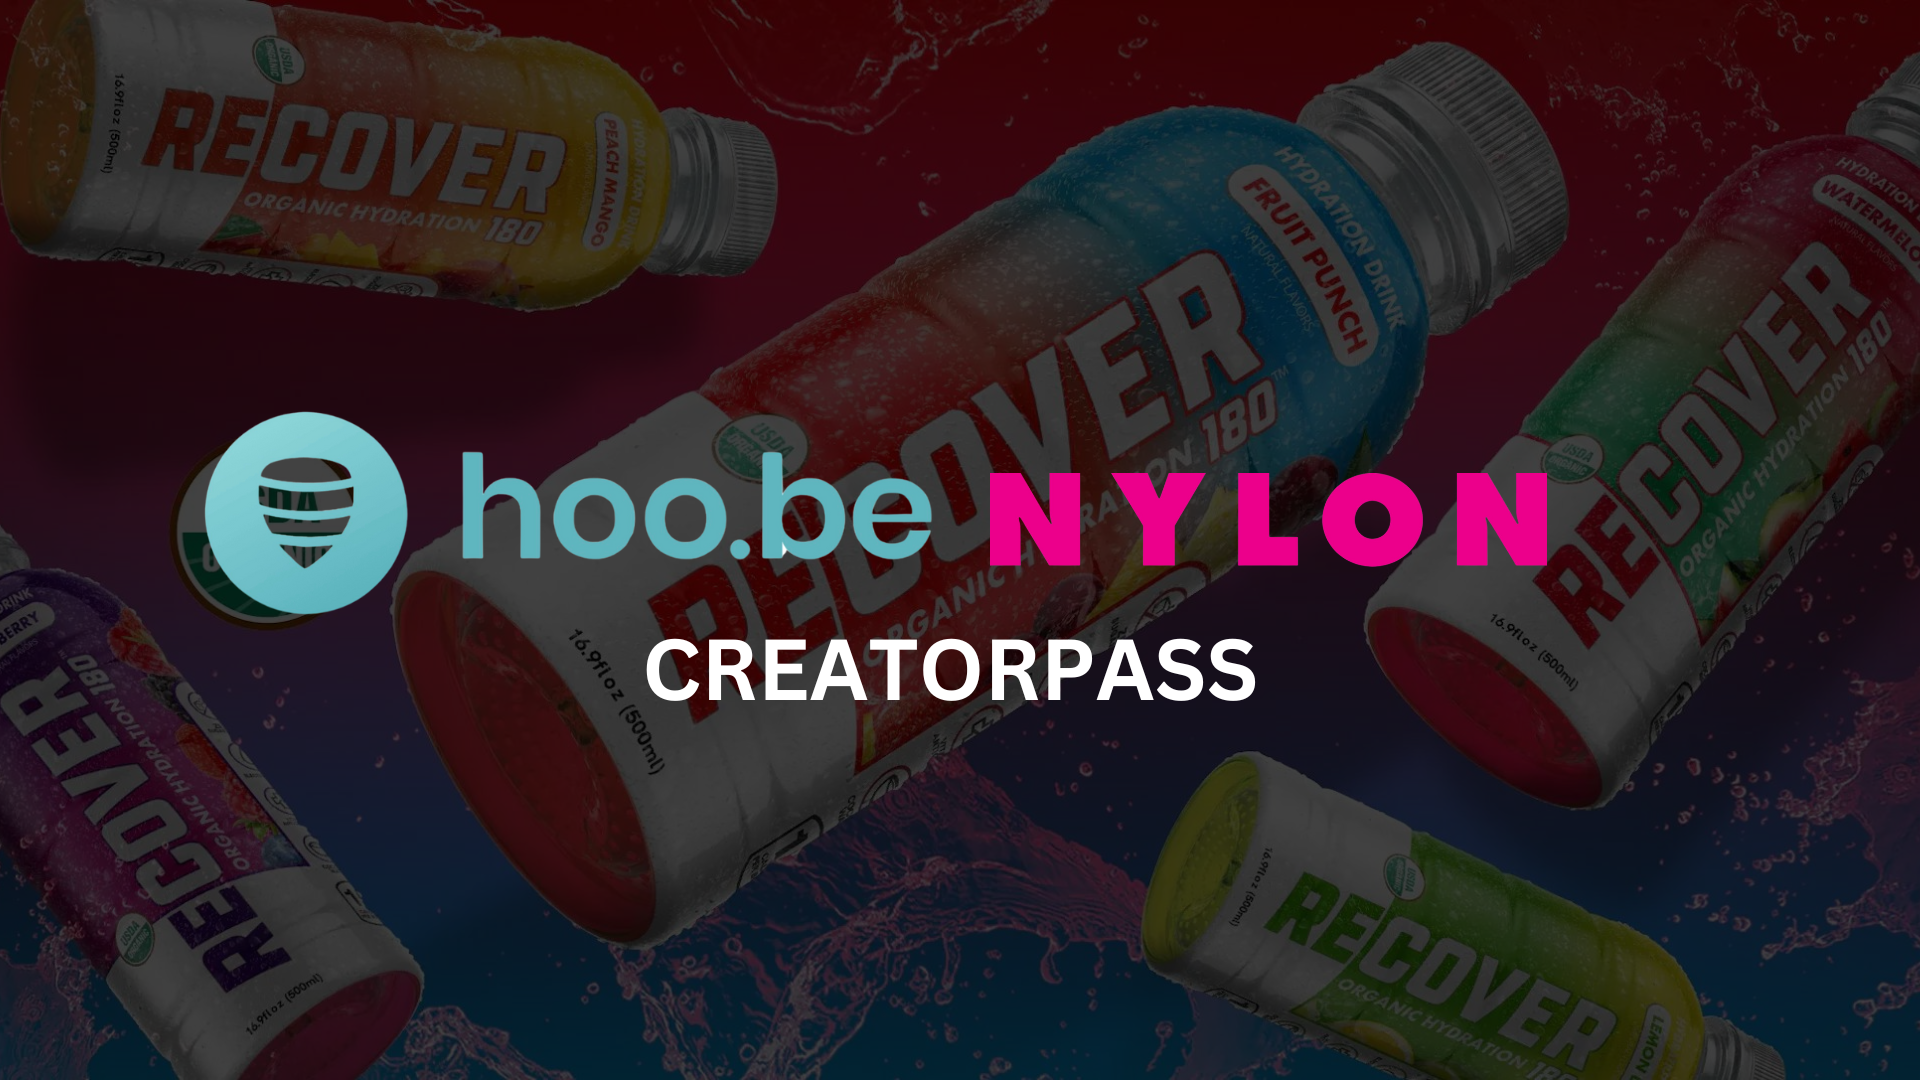 Breaking Boundaries: Recover 180’s Coachella’s Nylon Party, Fueled by Creatorpass by hoo.be